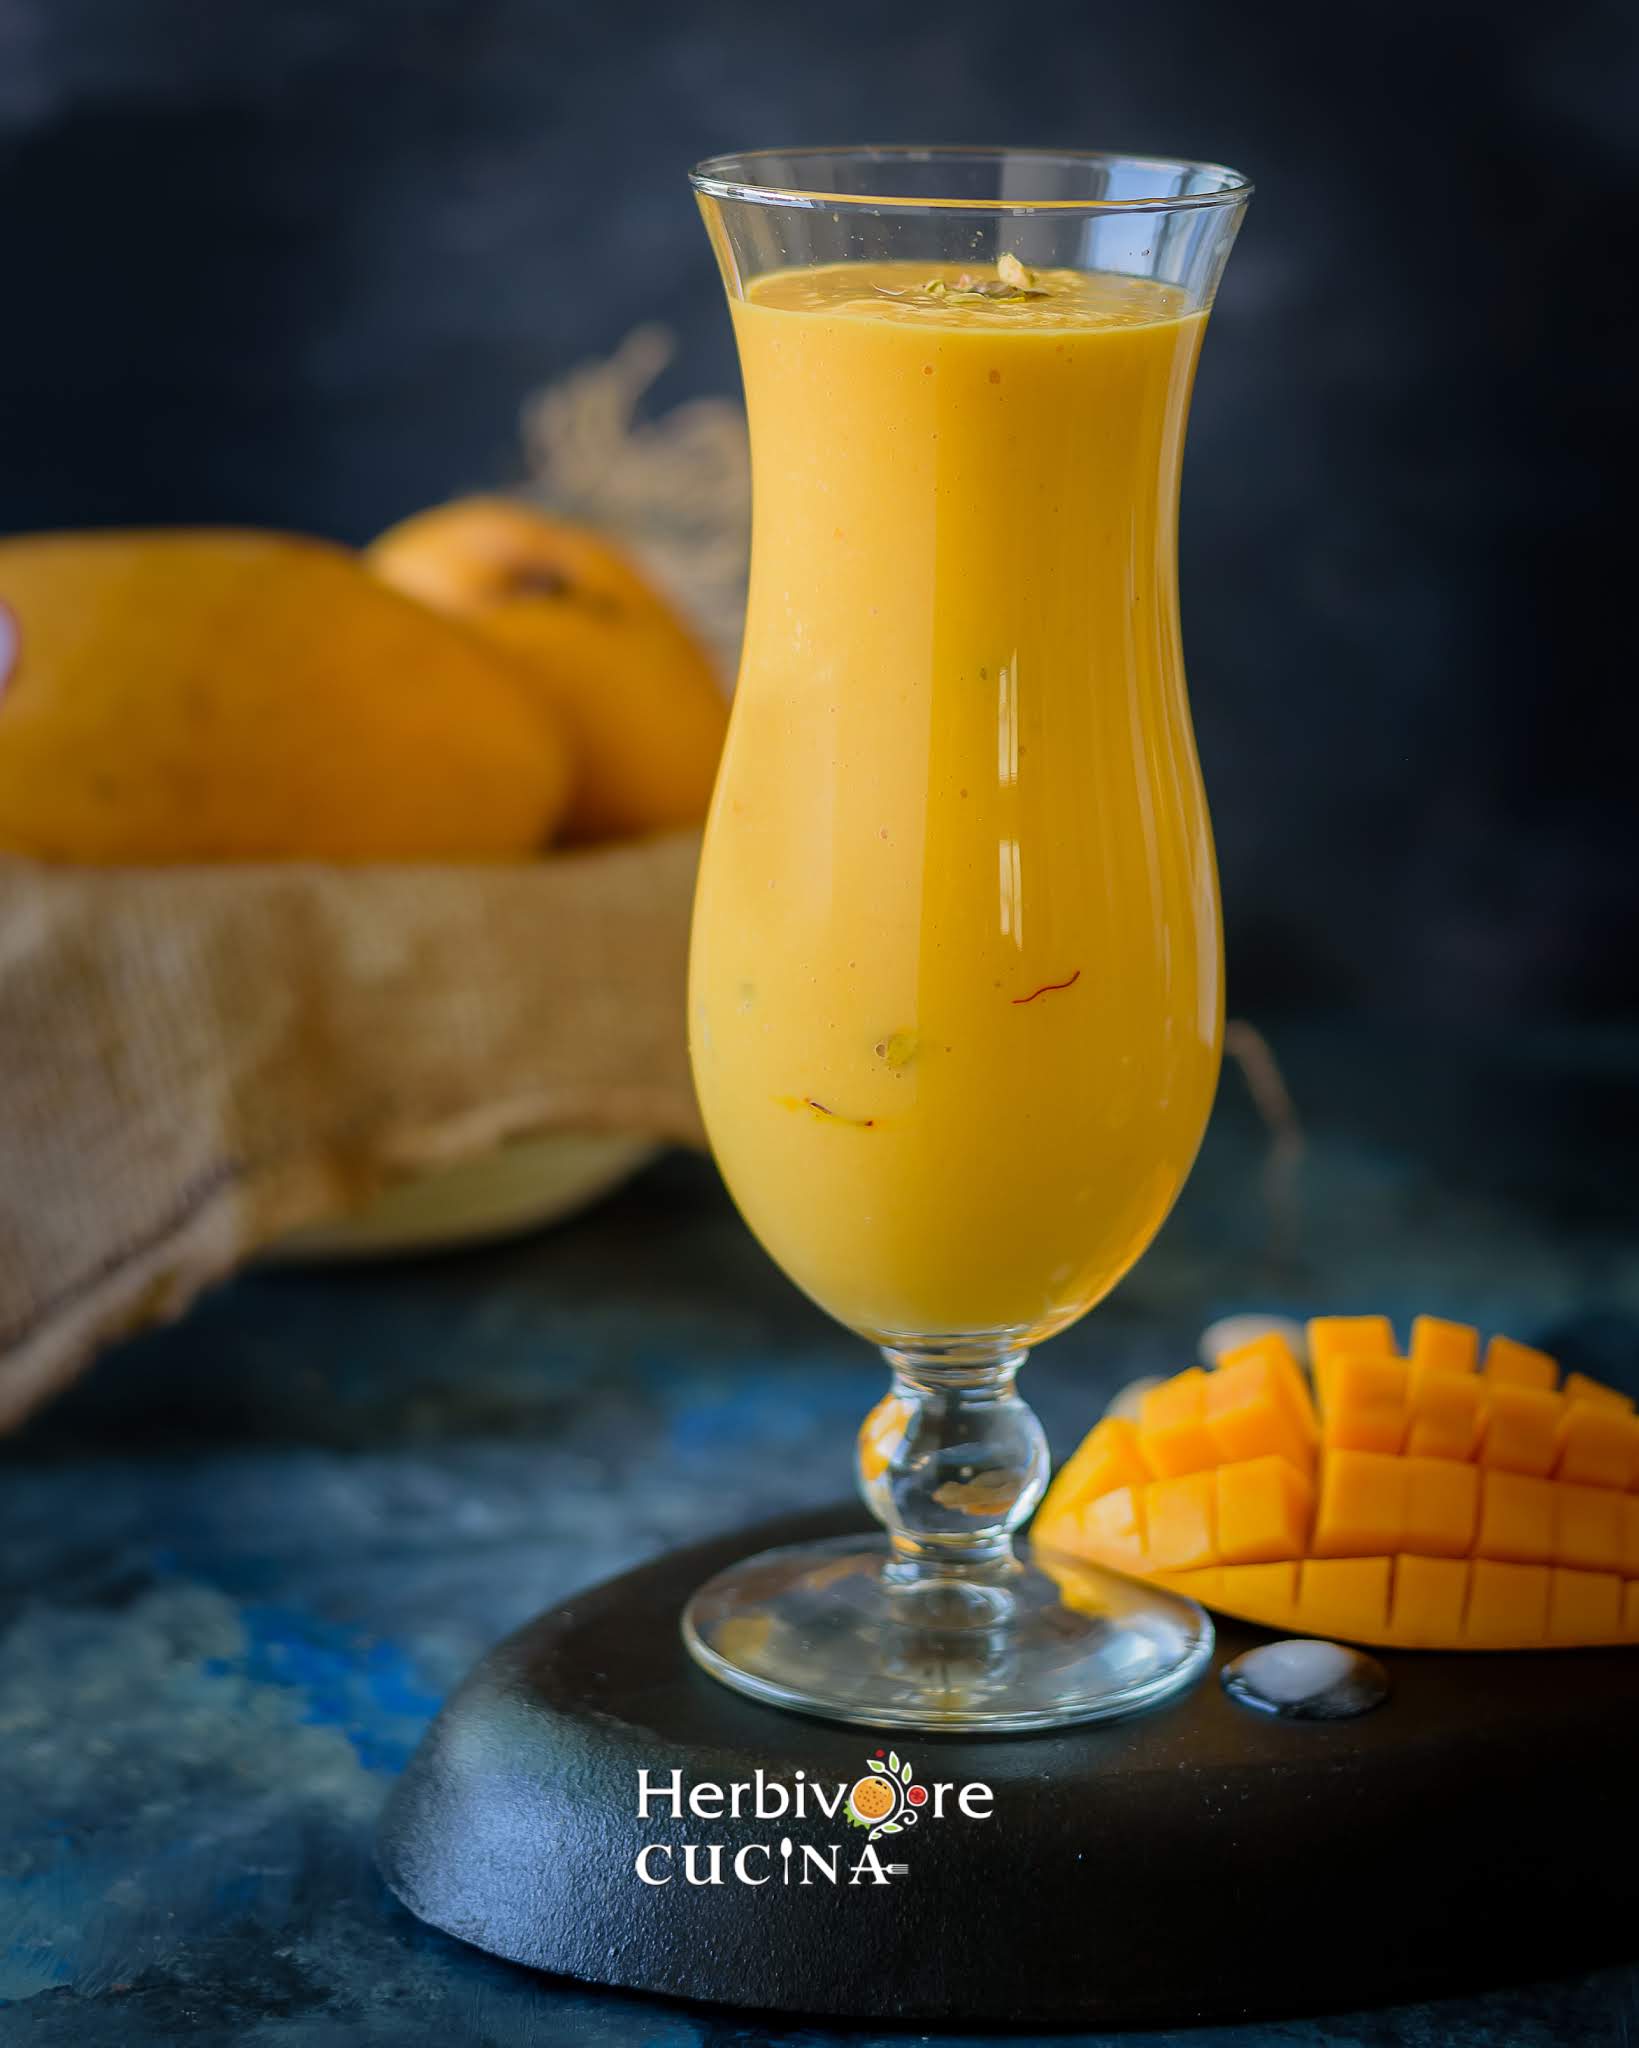 A tall glass of mango lassi with some whole and chopped mangos on the side against a dark background.